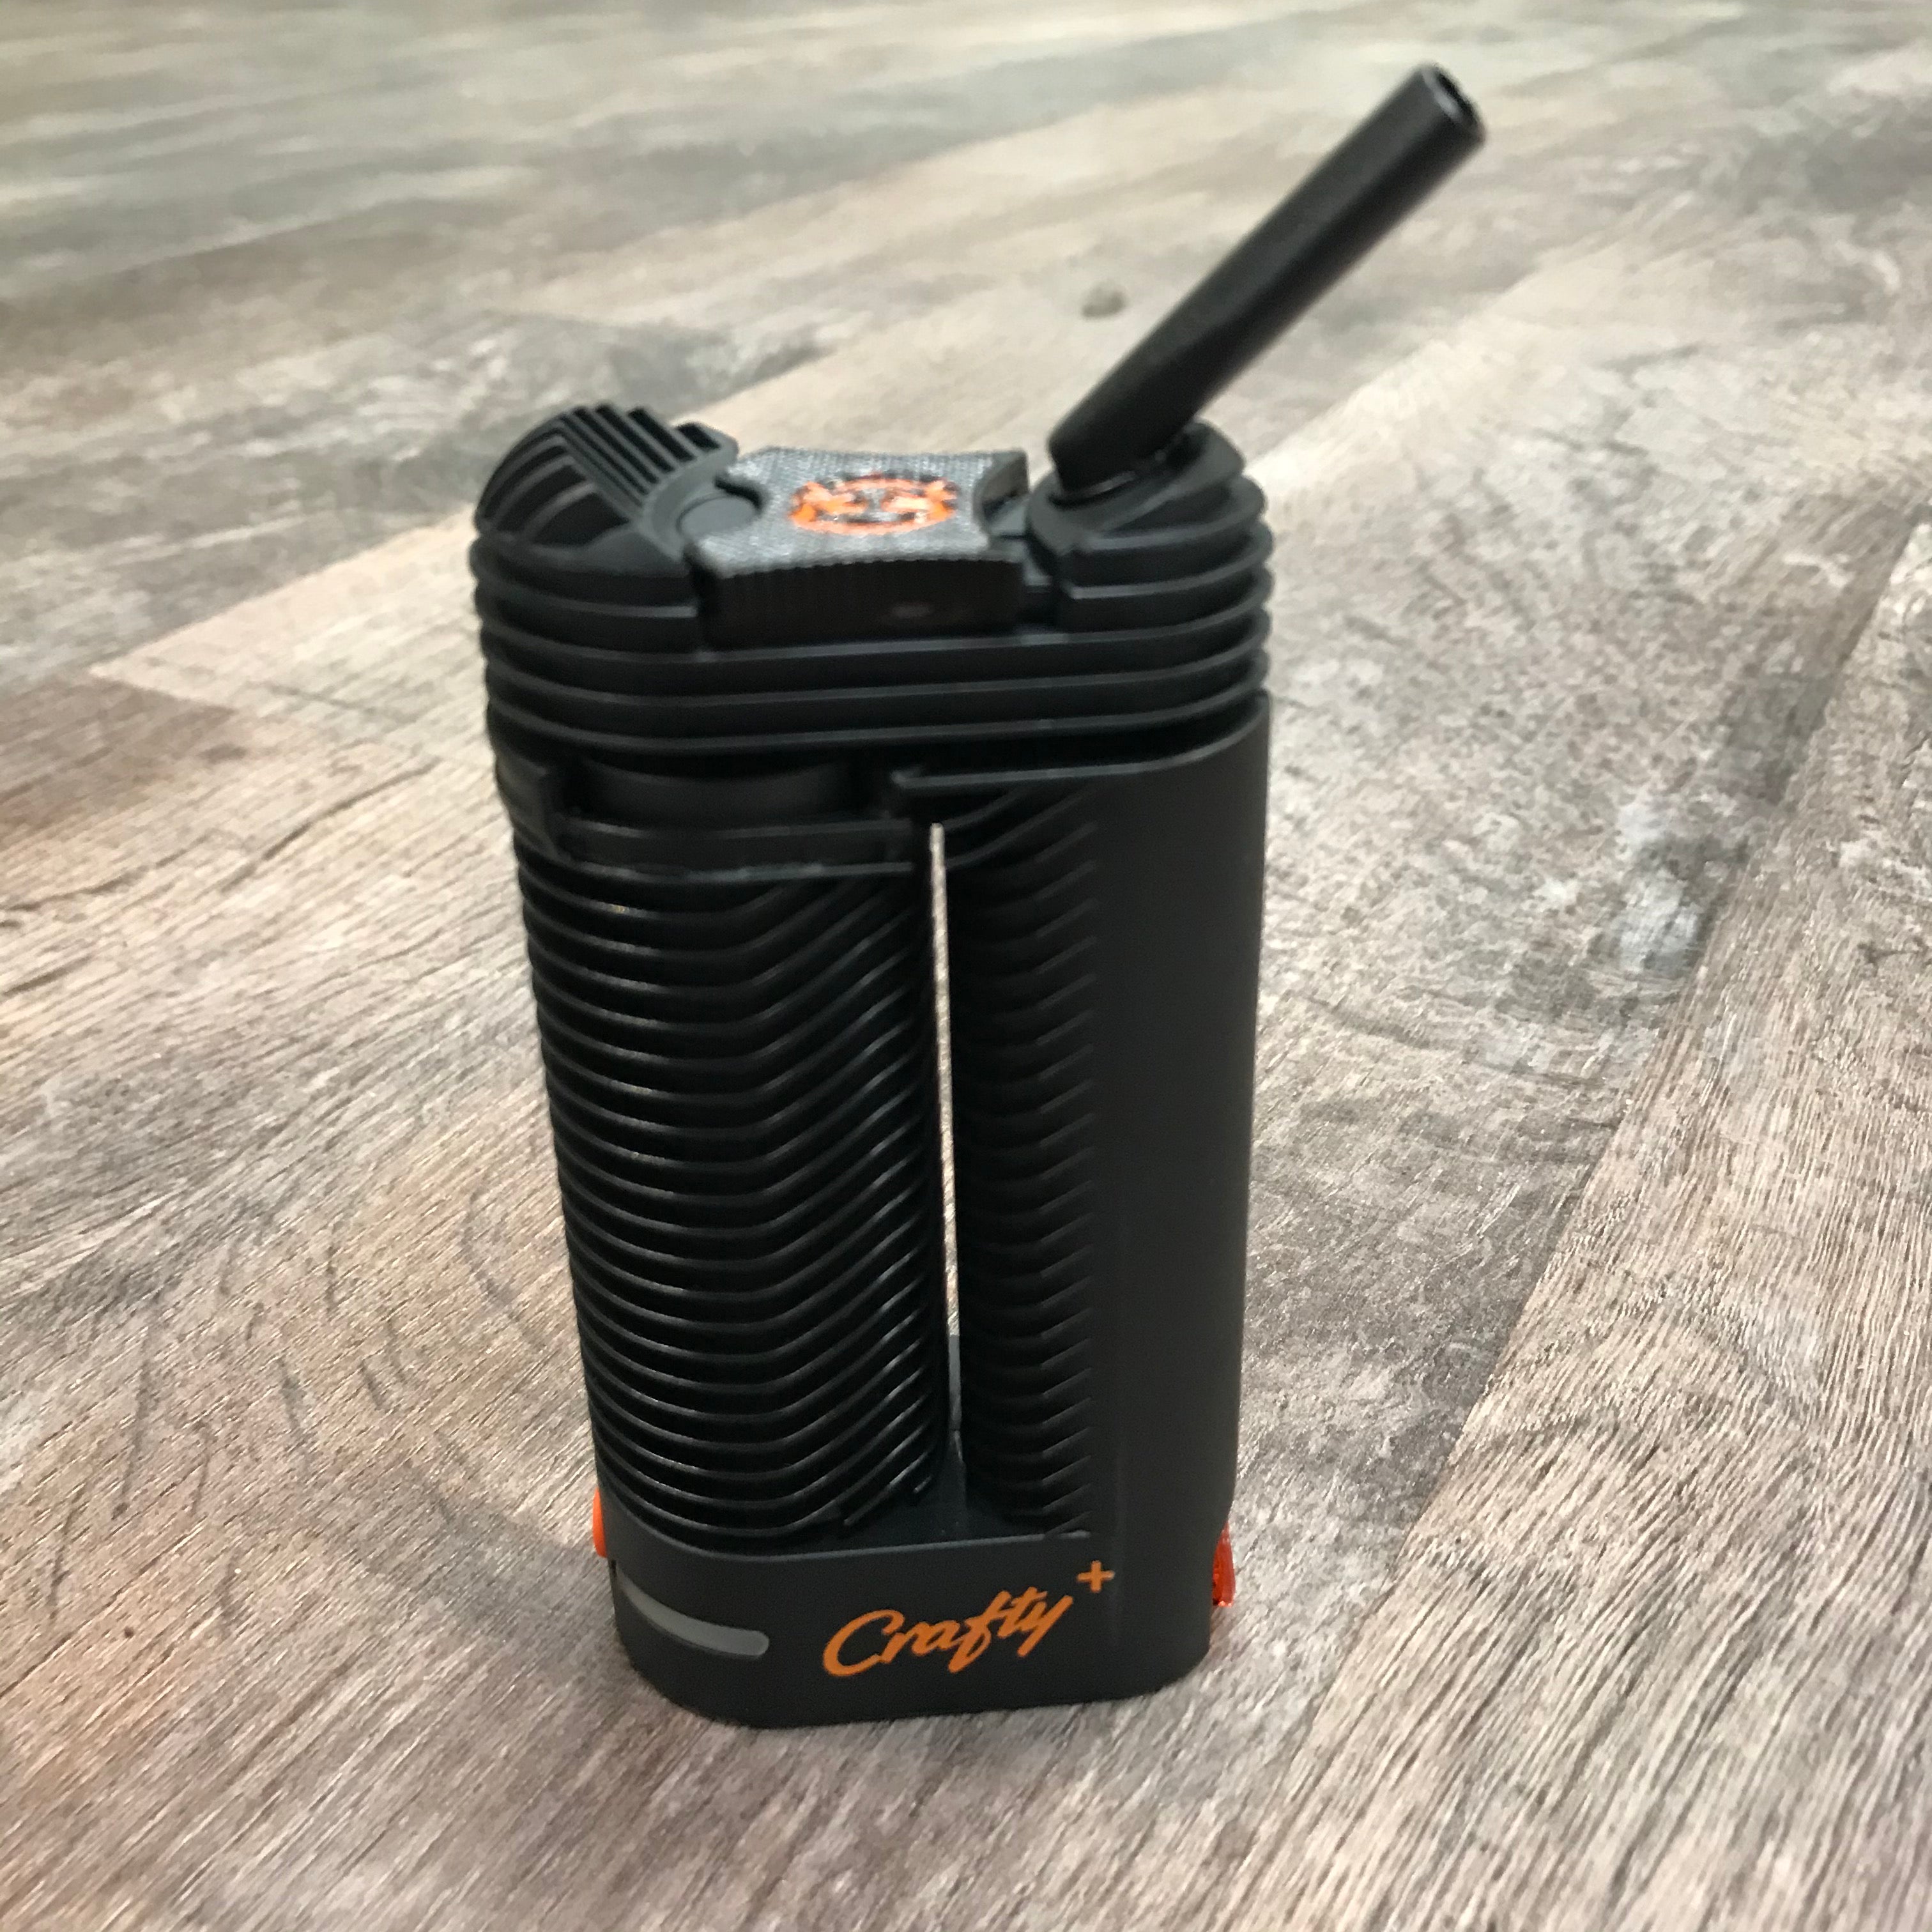 Crafty+ Dry Flower Vaporizer (THIS ITEM IS FOR IN-STORE PICKUP ONLY)